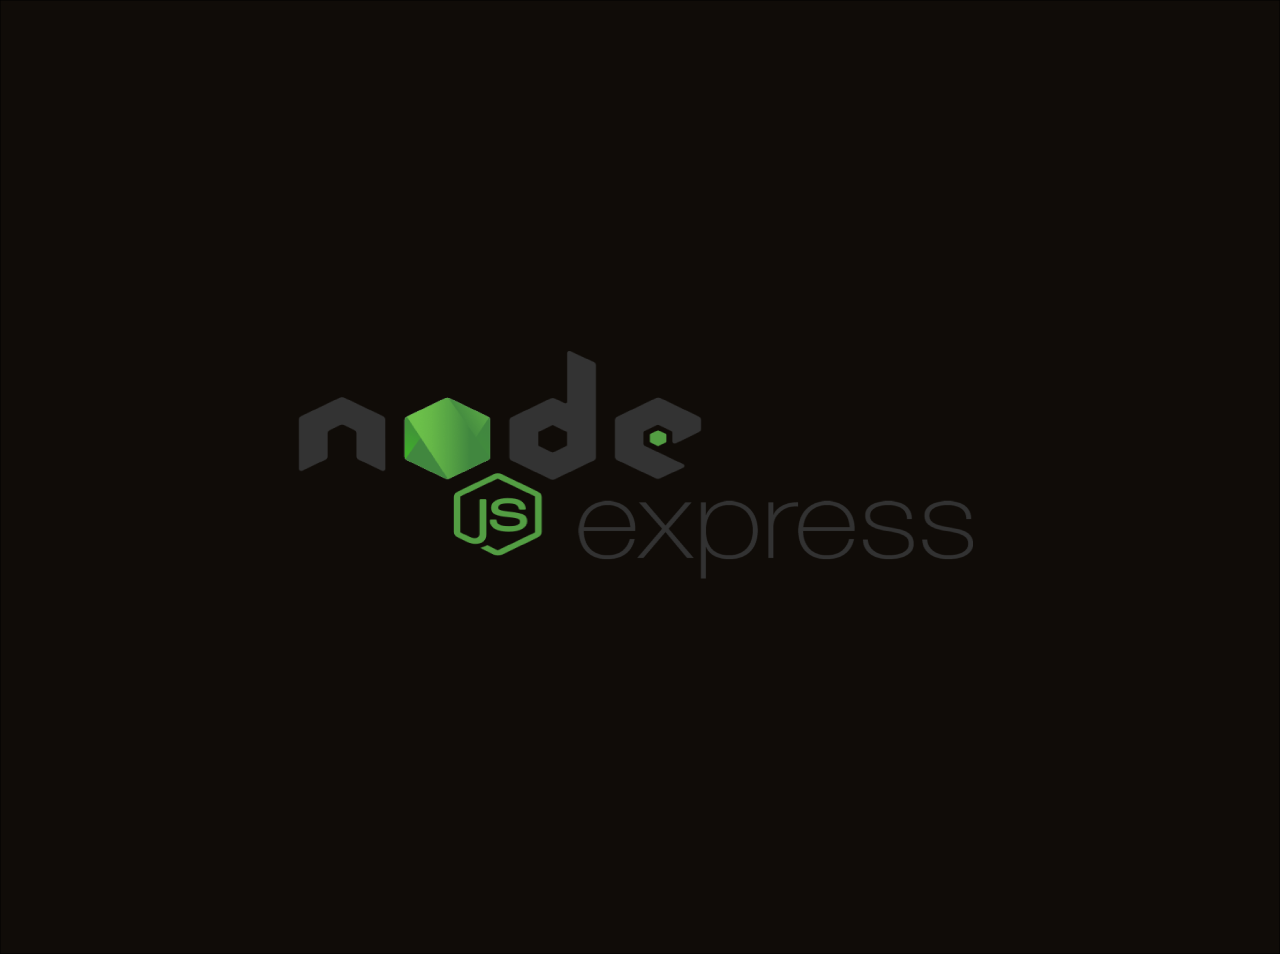 How to create simple Node.js server